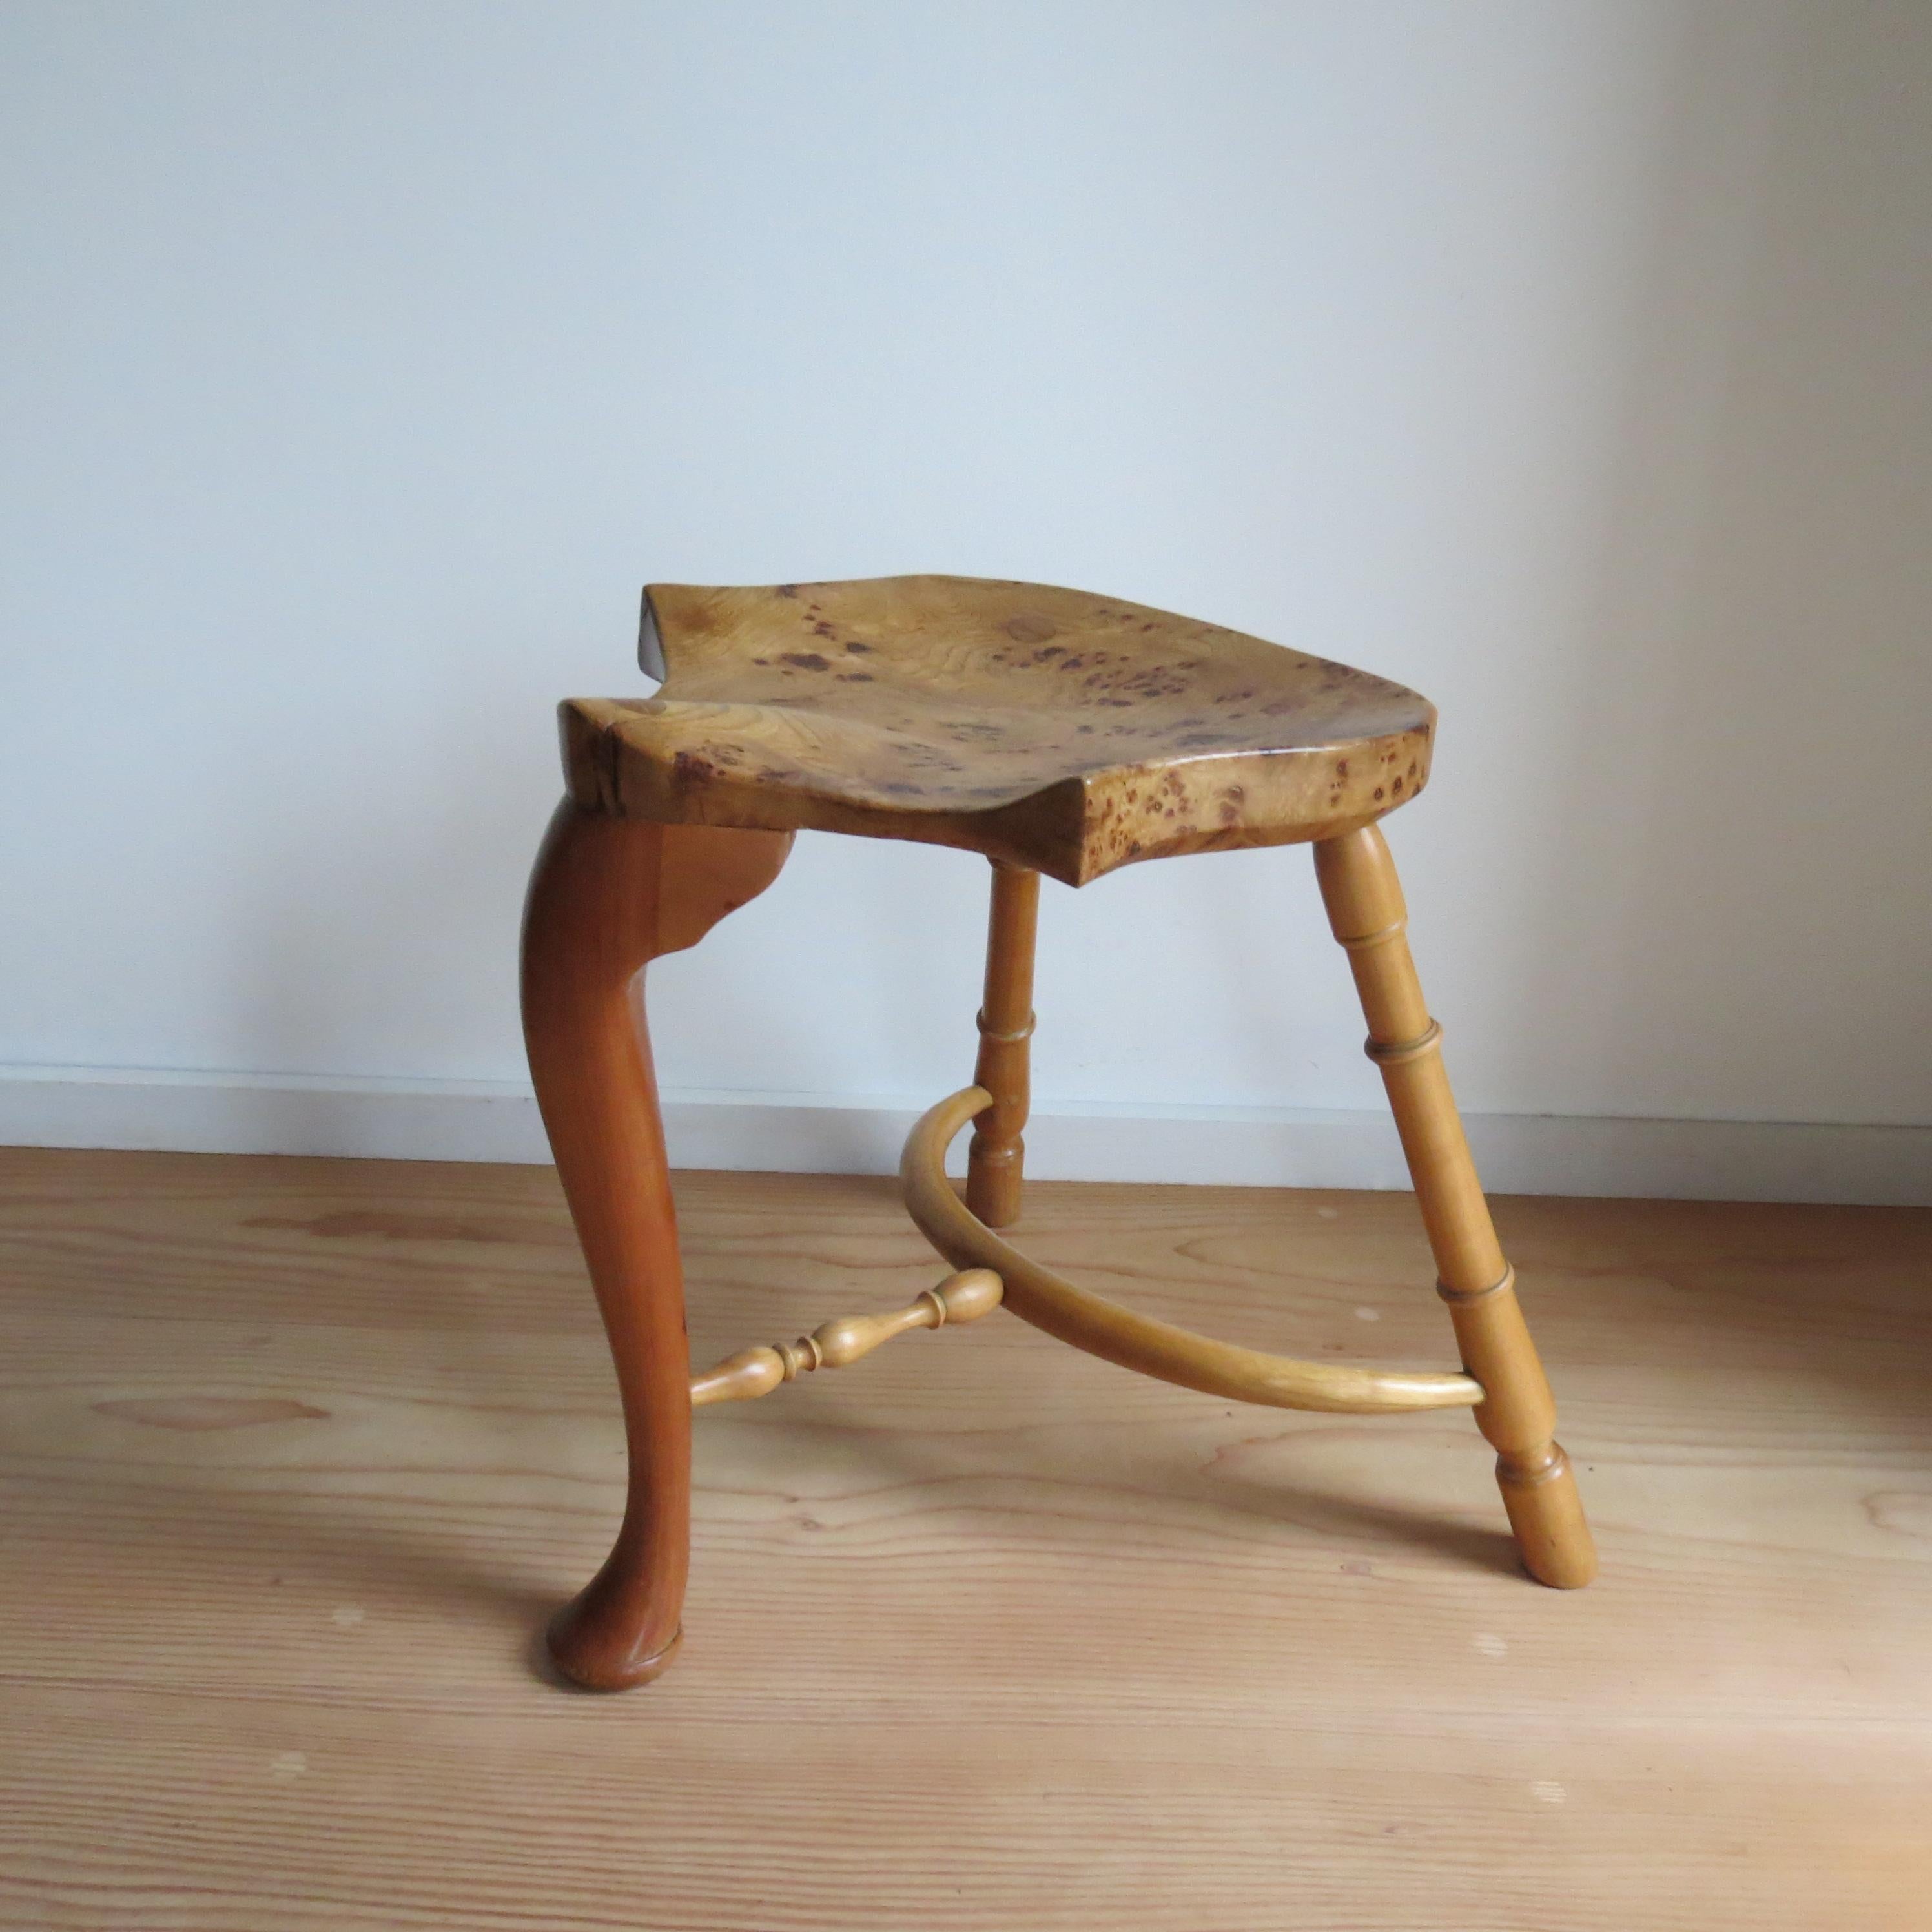 Hand-Crafted Pair of Burr Ash Three Legged Stools Bespoke Made by Stewart Linford